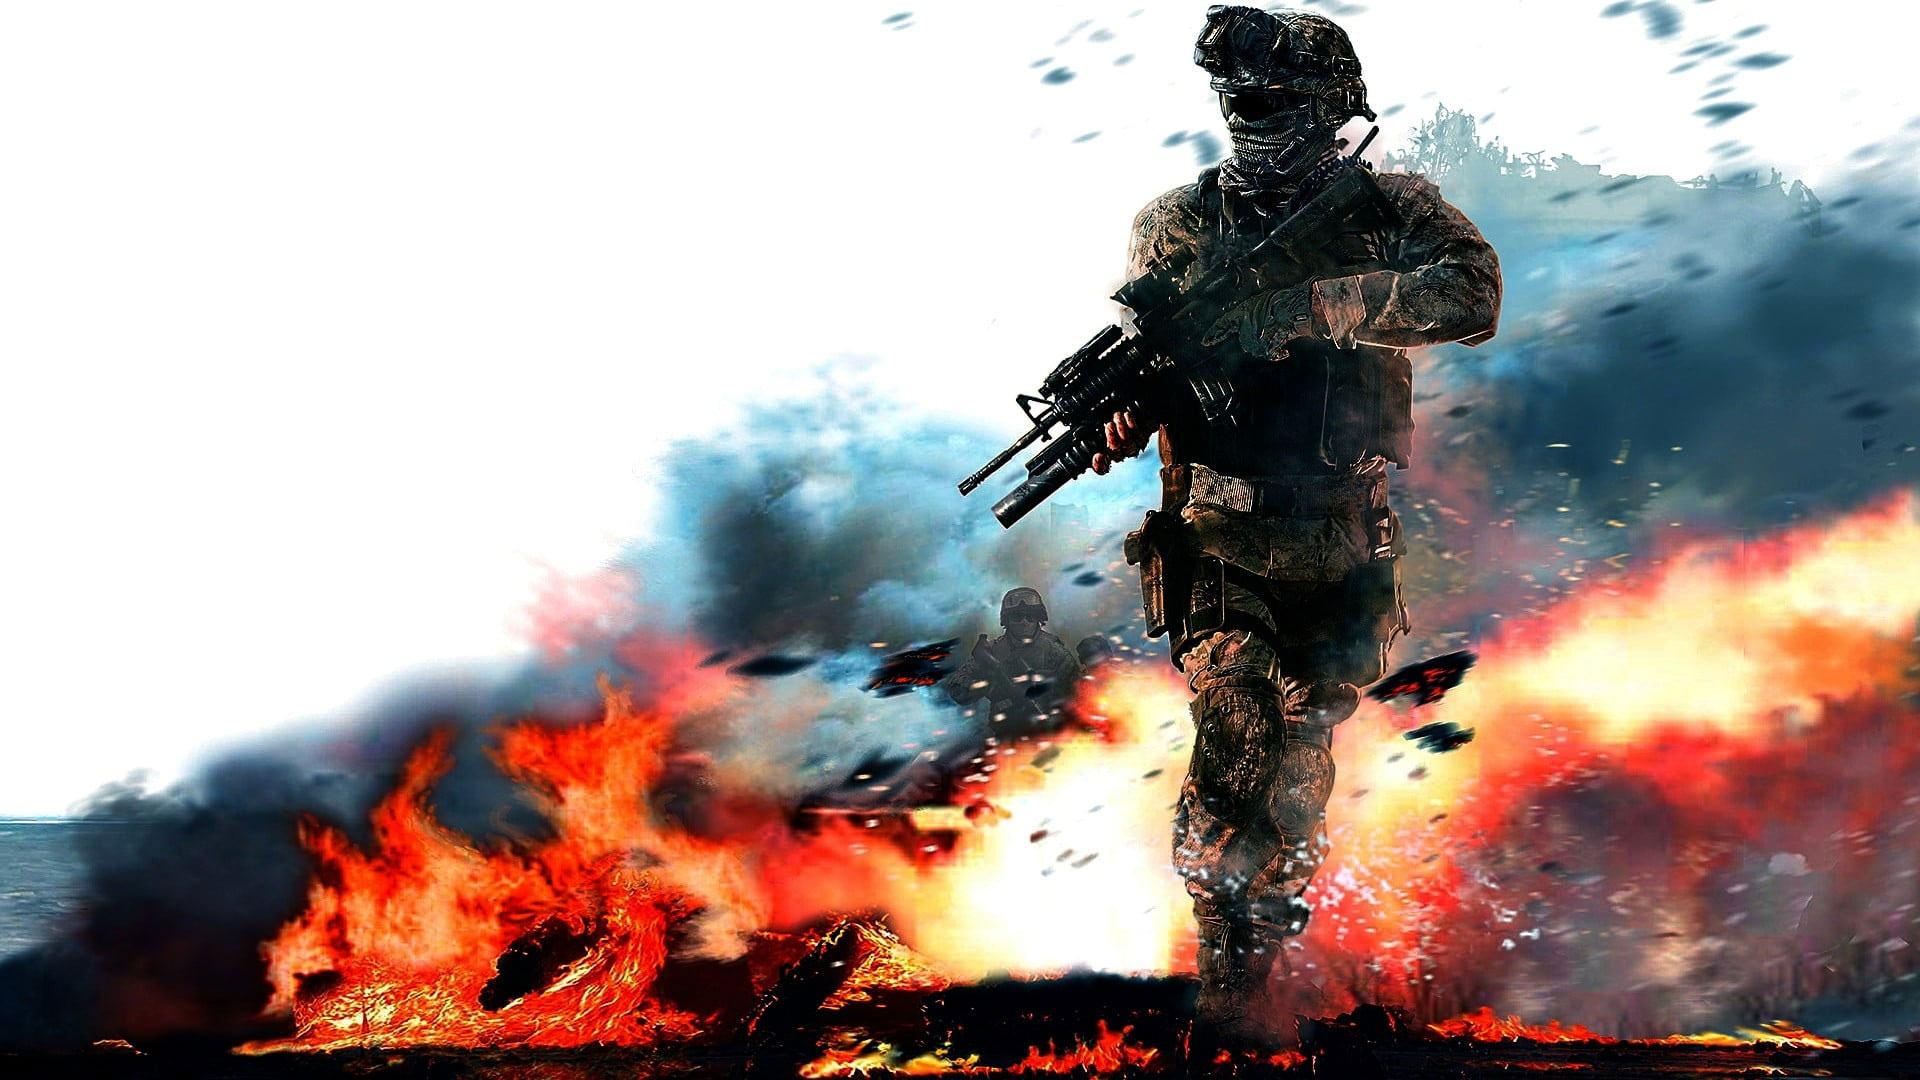 Wallpaper Soldier Holding Assault Rifle Poster, Cod